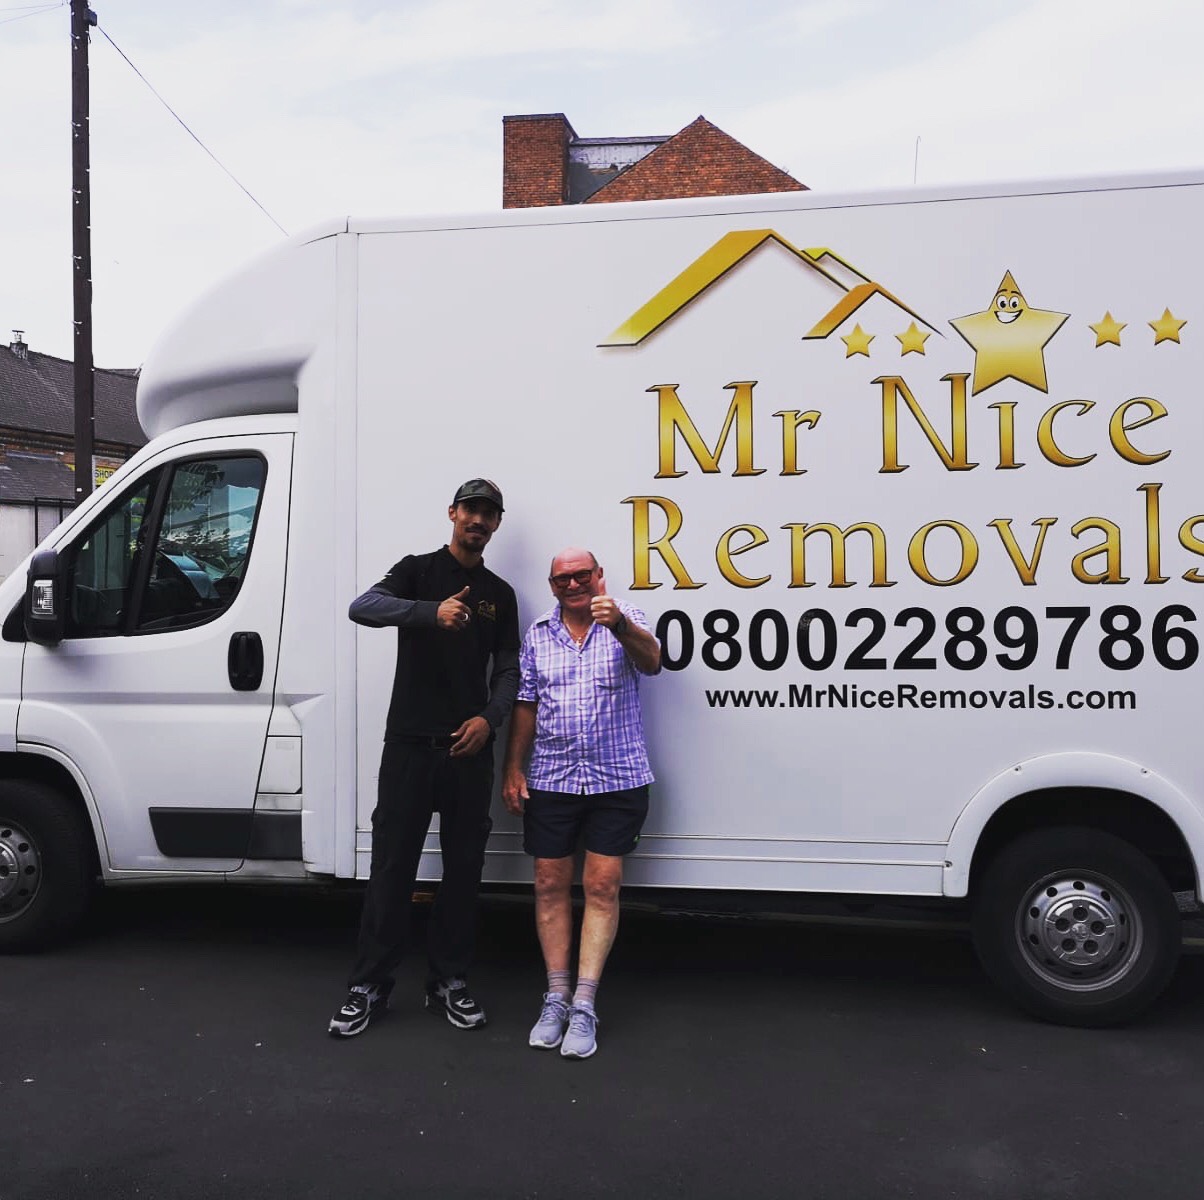 A man and woman standing in front of a removals truck.